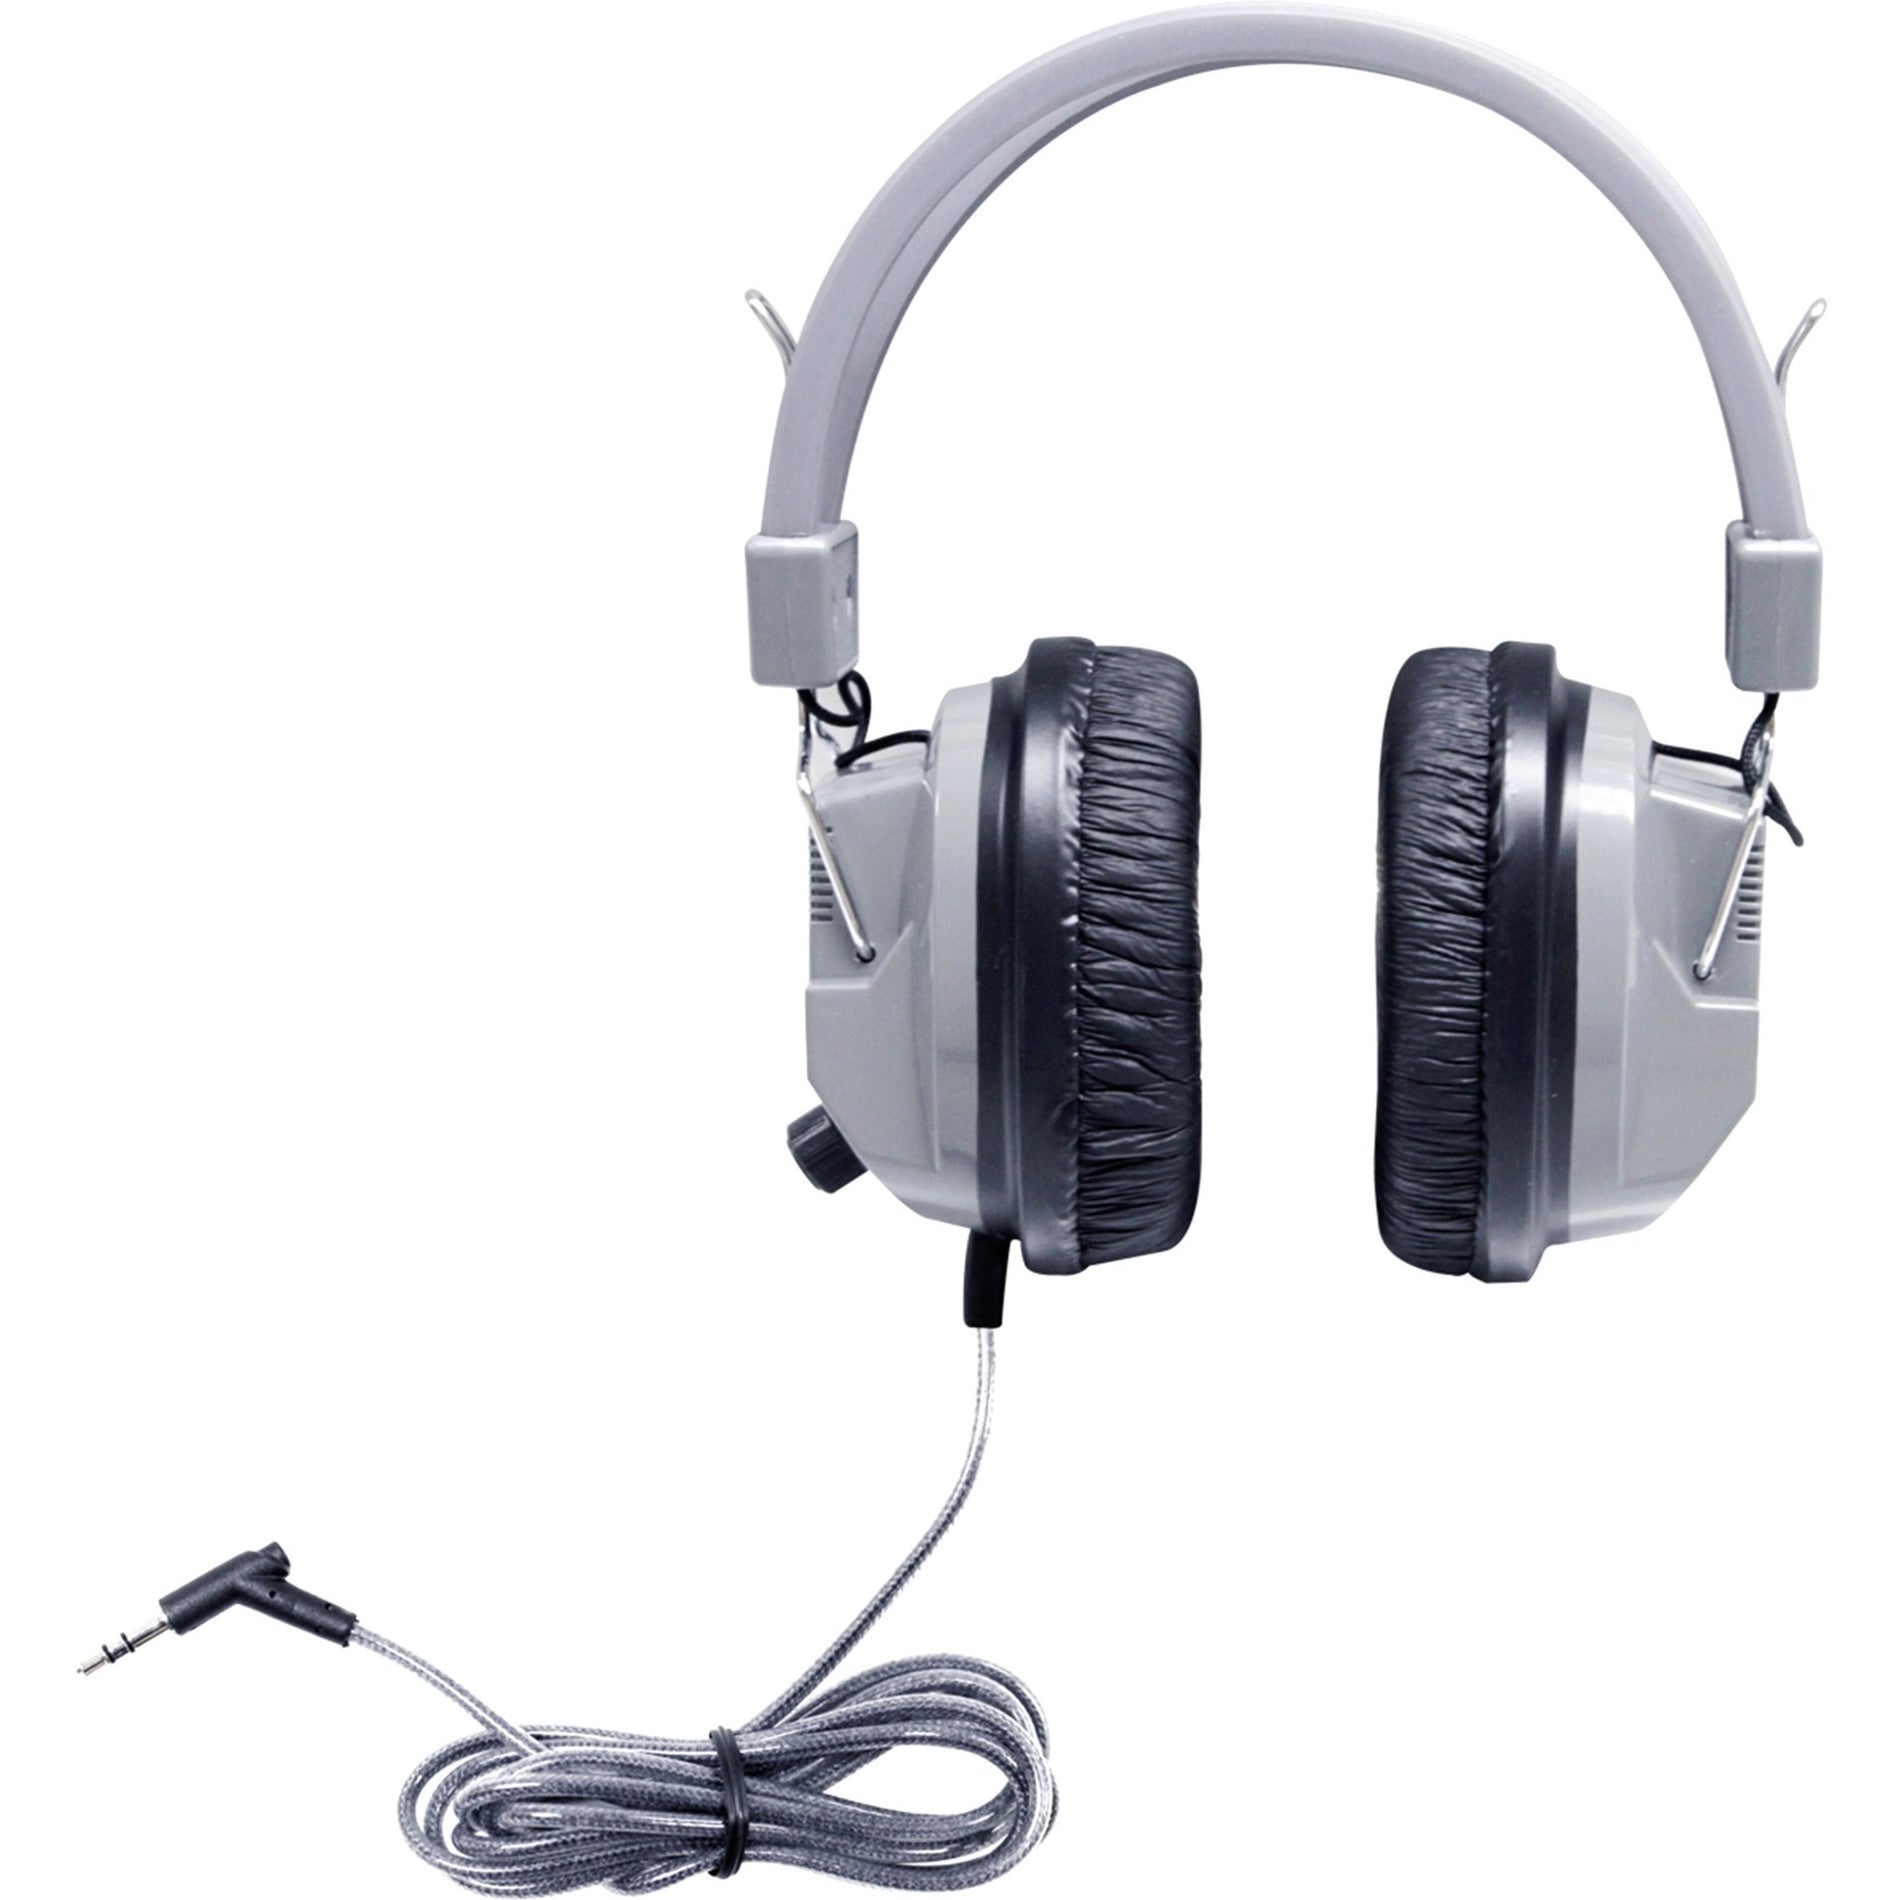 Hamilton Buhl SC-7V SchoolMate Deluxe Stereo Headphone with 3.5mm and Volume, Over-Ear Headphones with Noise Isolation, Tangle-free Cable, and Robust Design